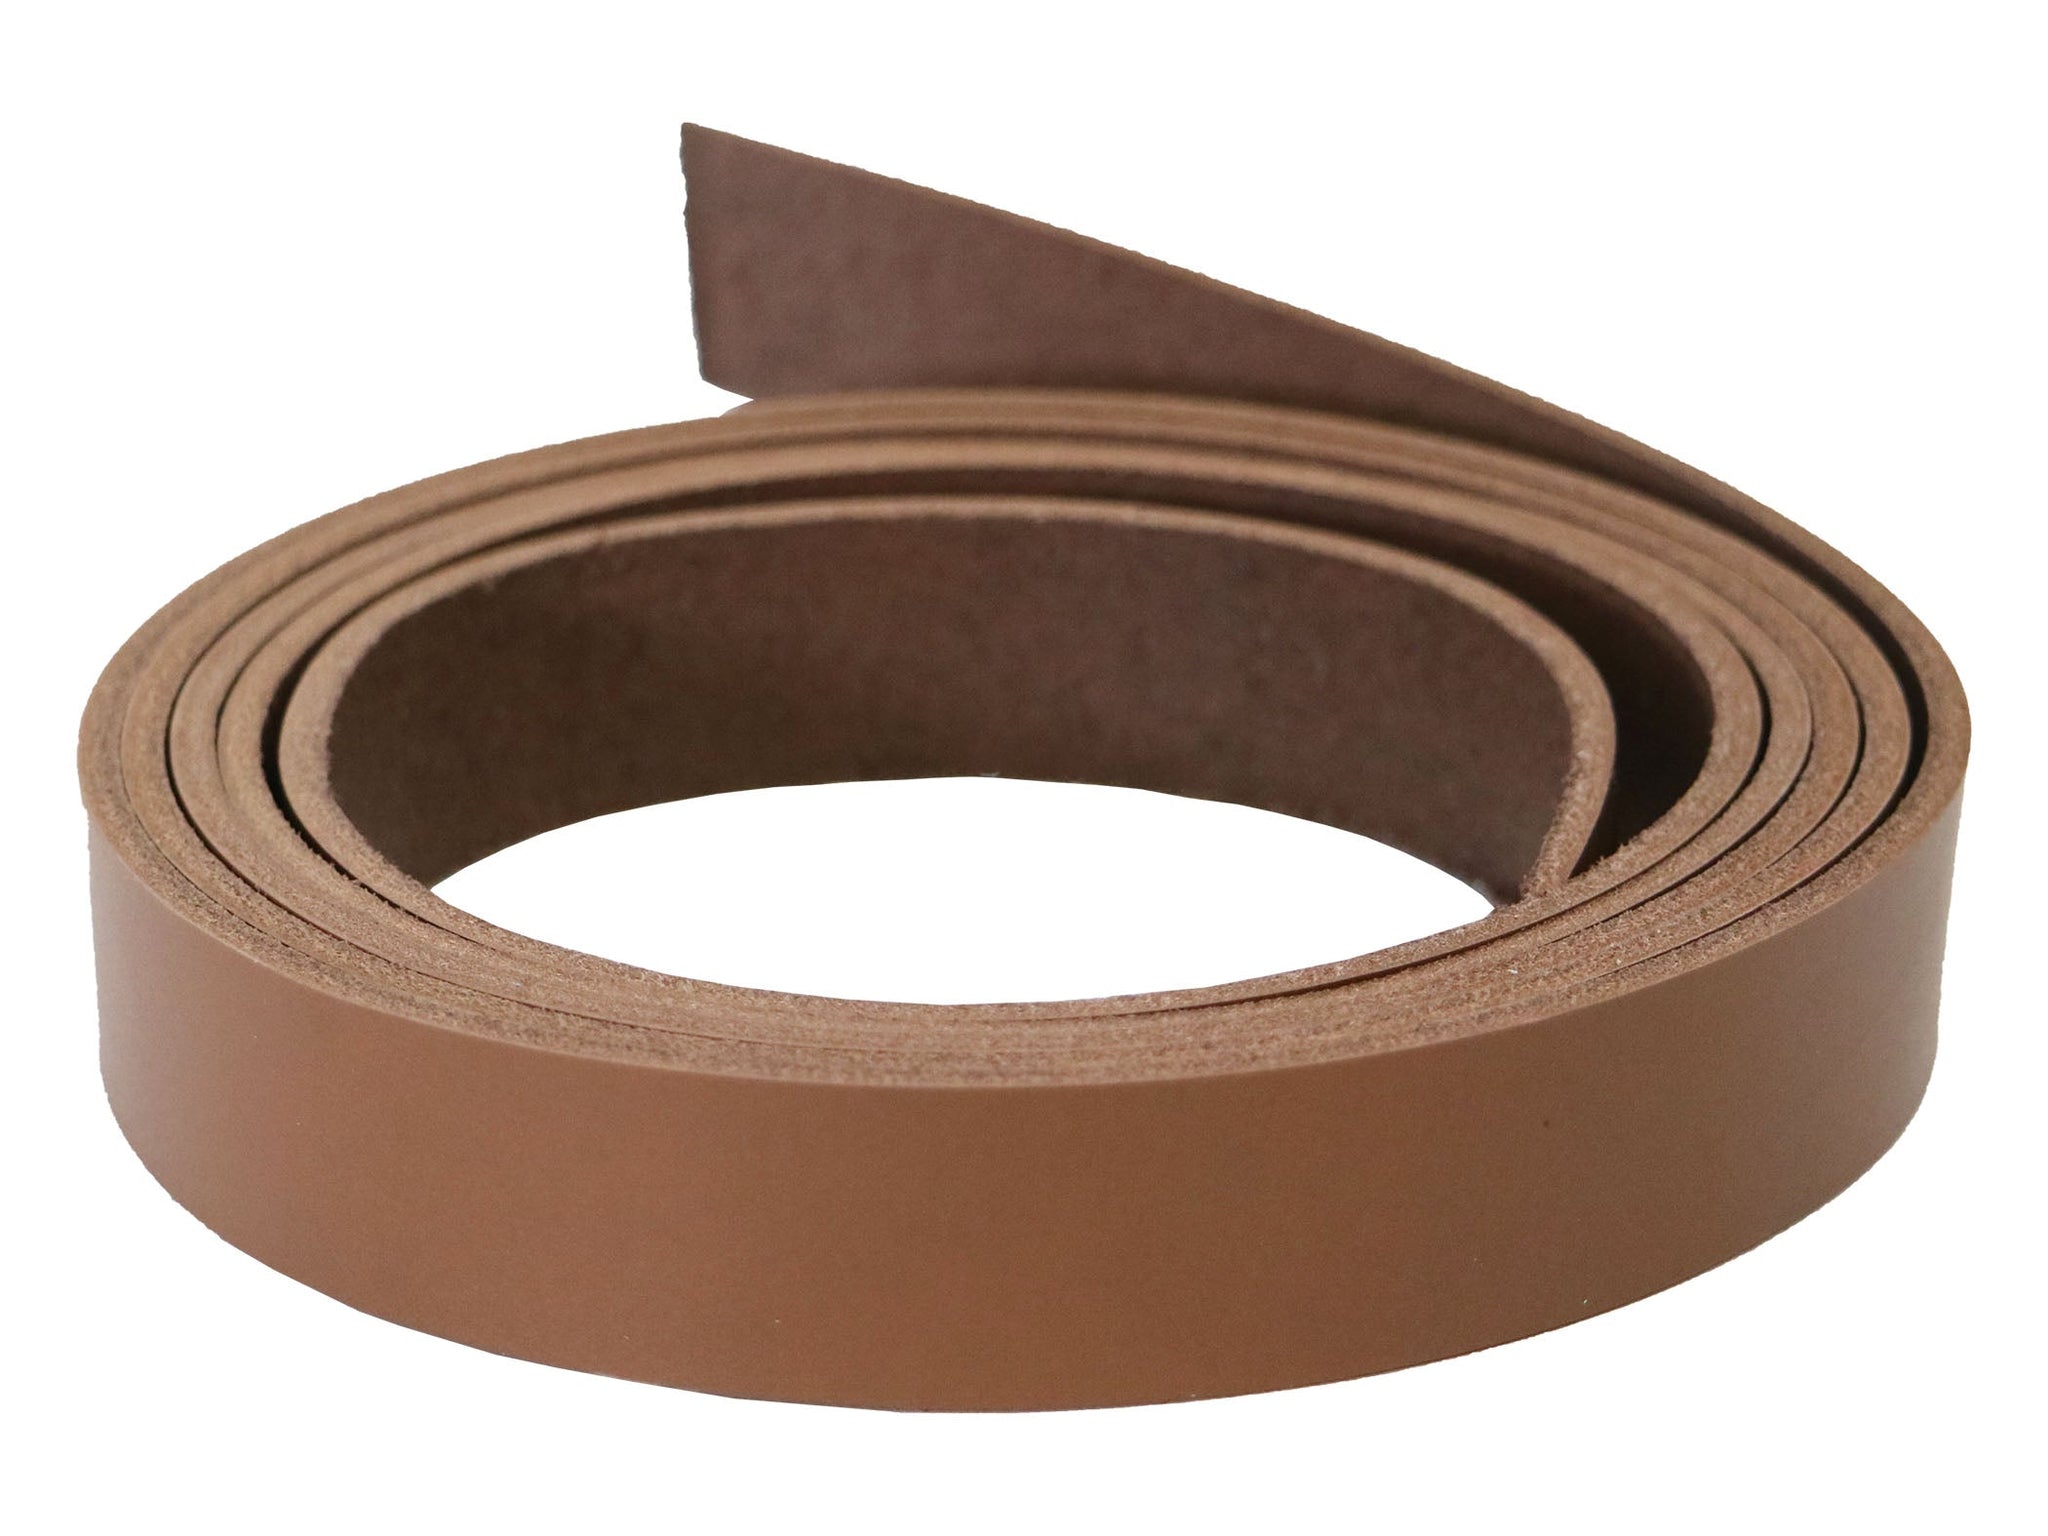 Caramel Brown Veg Tan Leather Strip, 60 in Length, Premium Vegetable Tanned Leather Strap 2.75 Wide / 6/7oz (2.4mm-2.8mm)